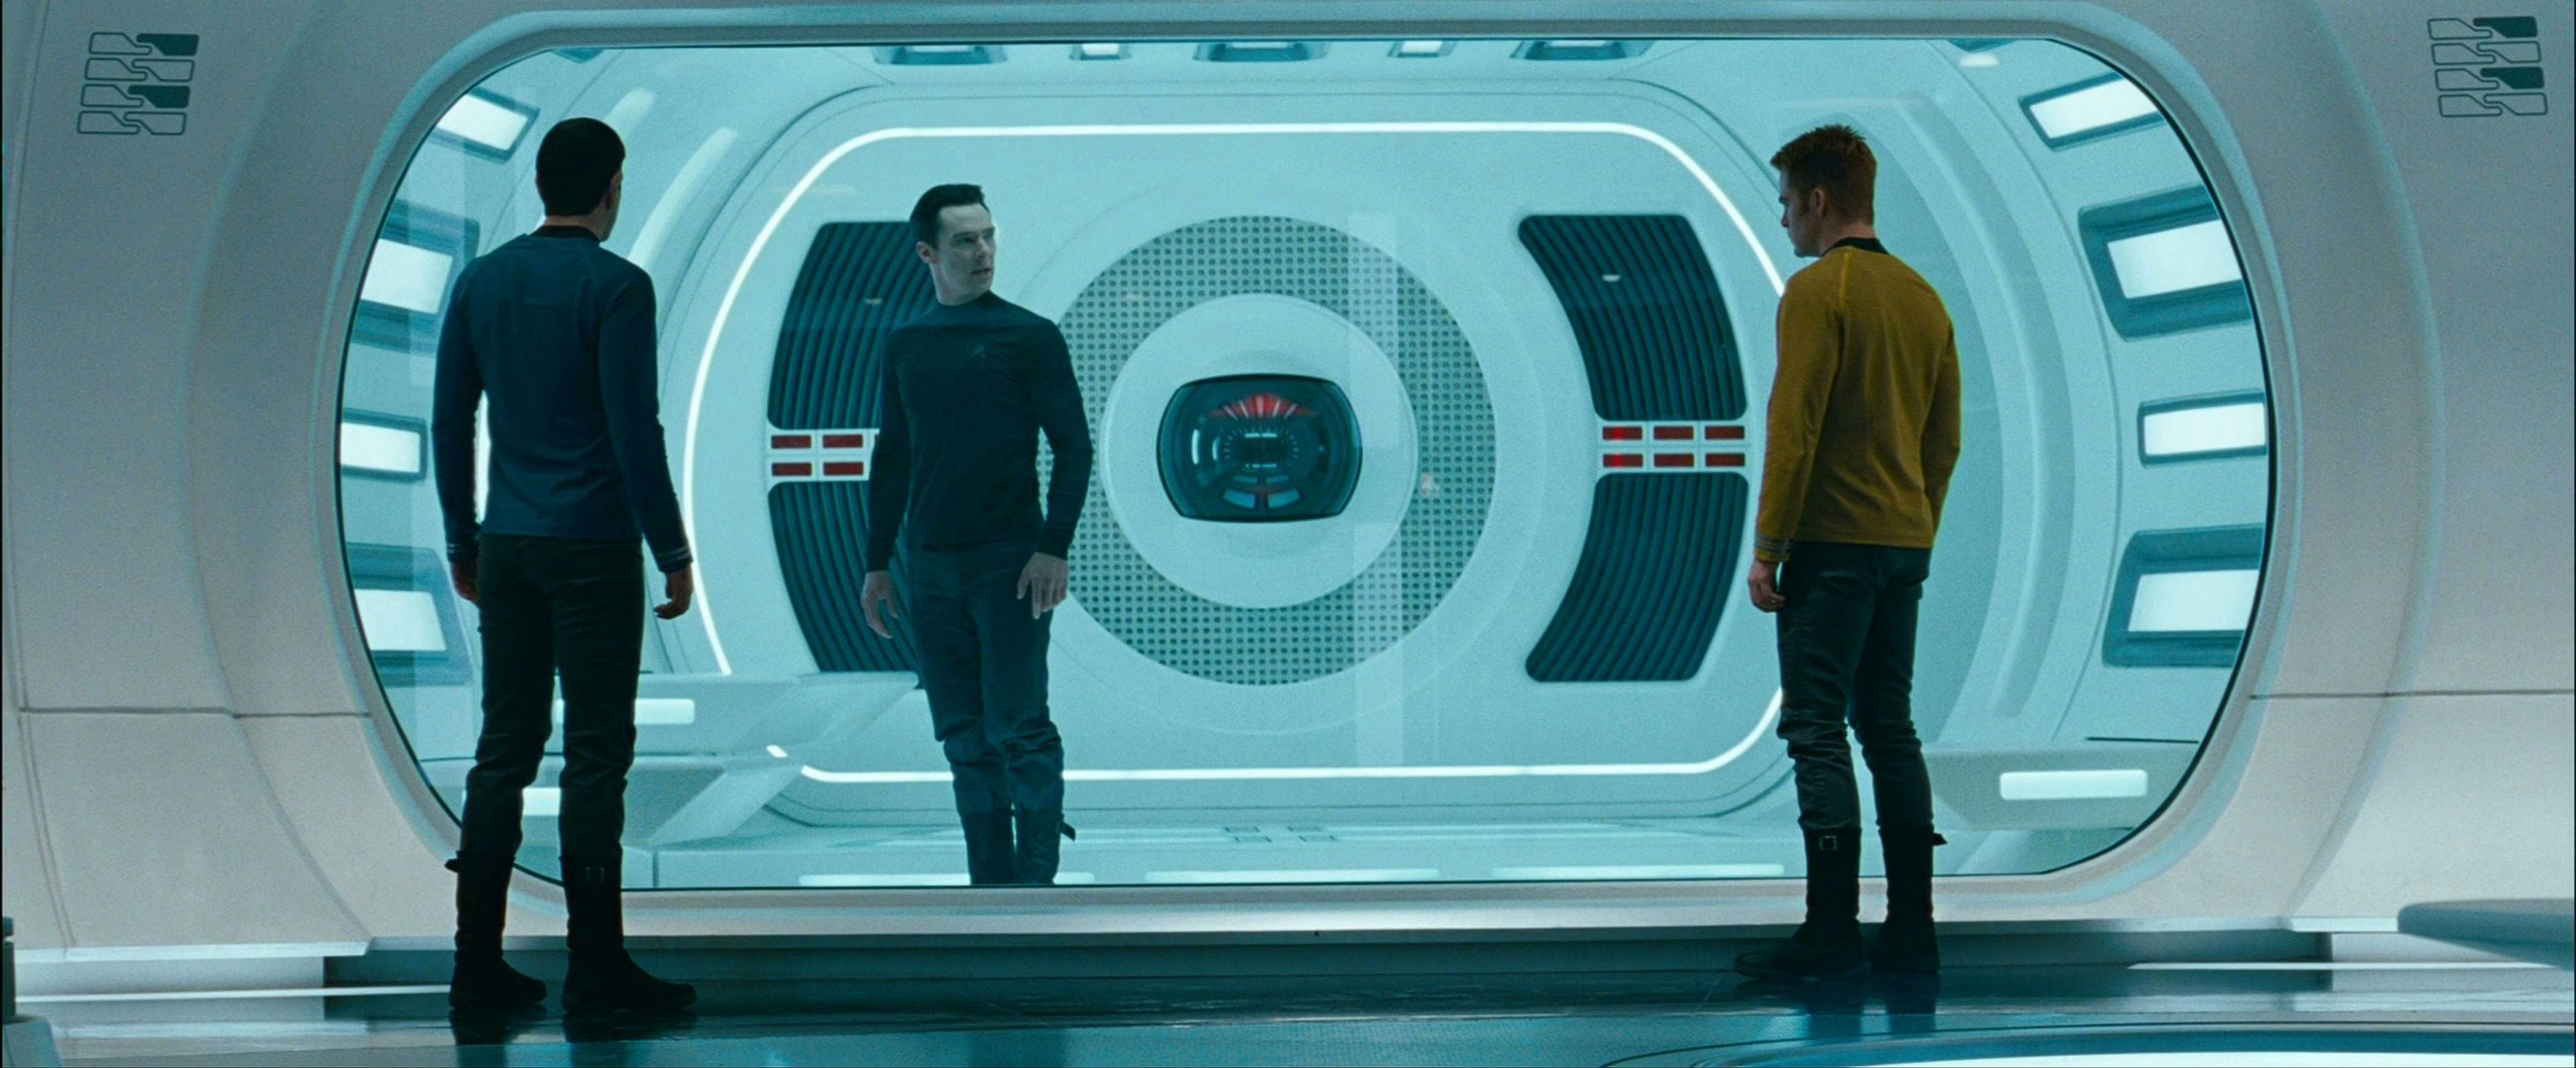 John Harrison/Khan (Benedict Cumberbatch) in questioned while in detainment by Spock (Zachary Quinto) and James Kirk (Chris Pine) in Star Trek Into Darkness